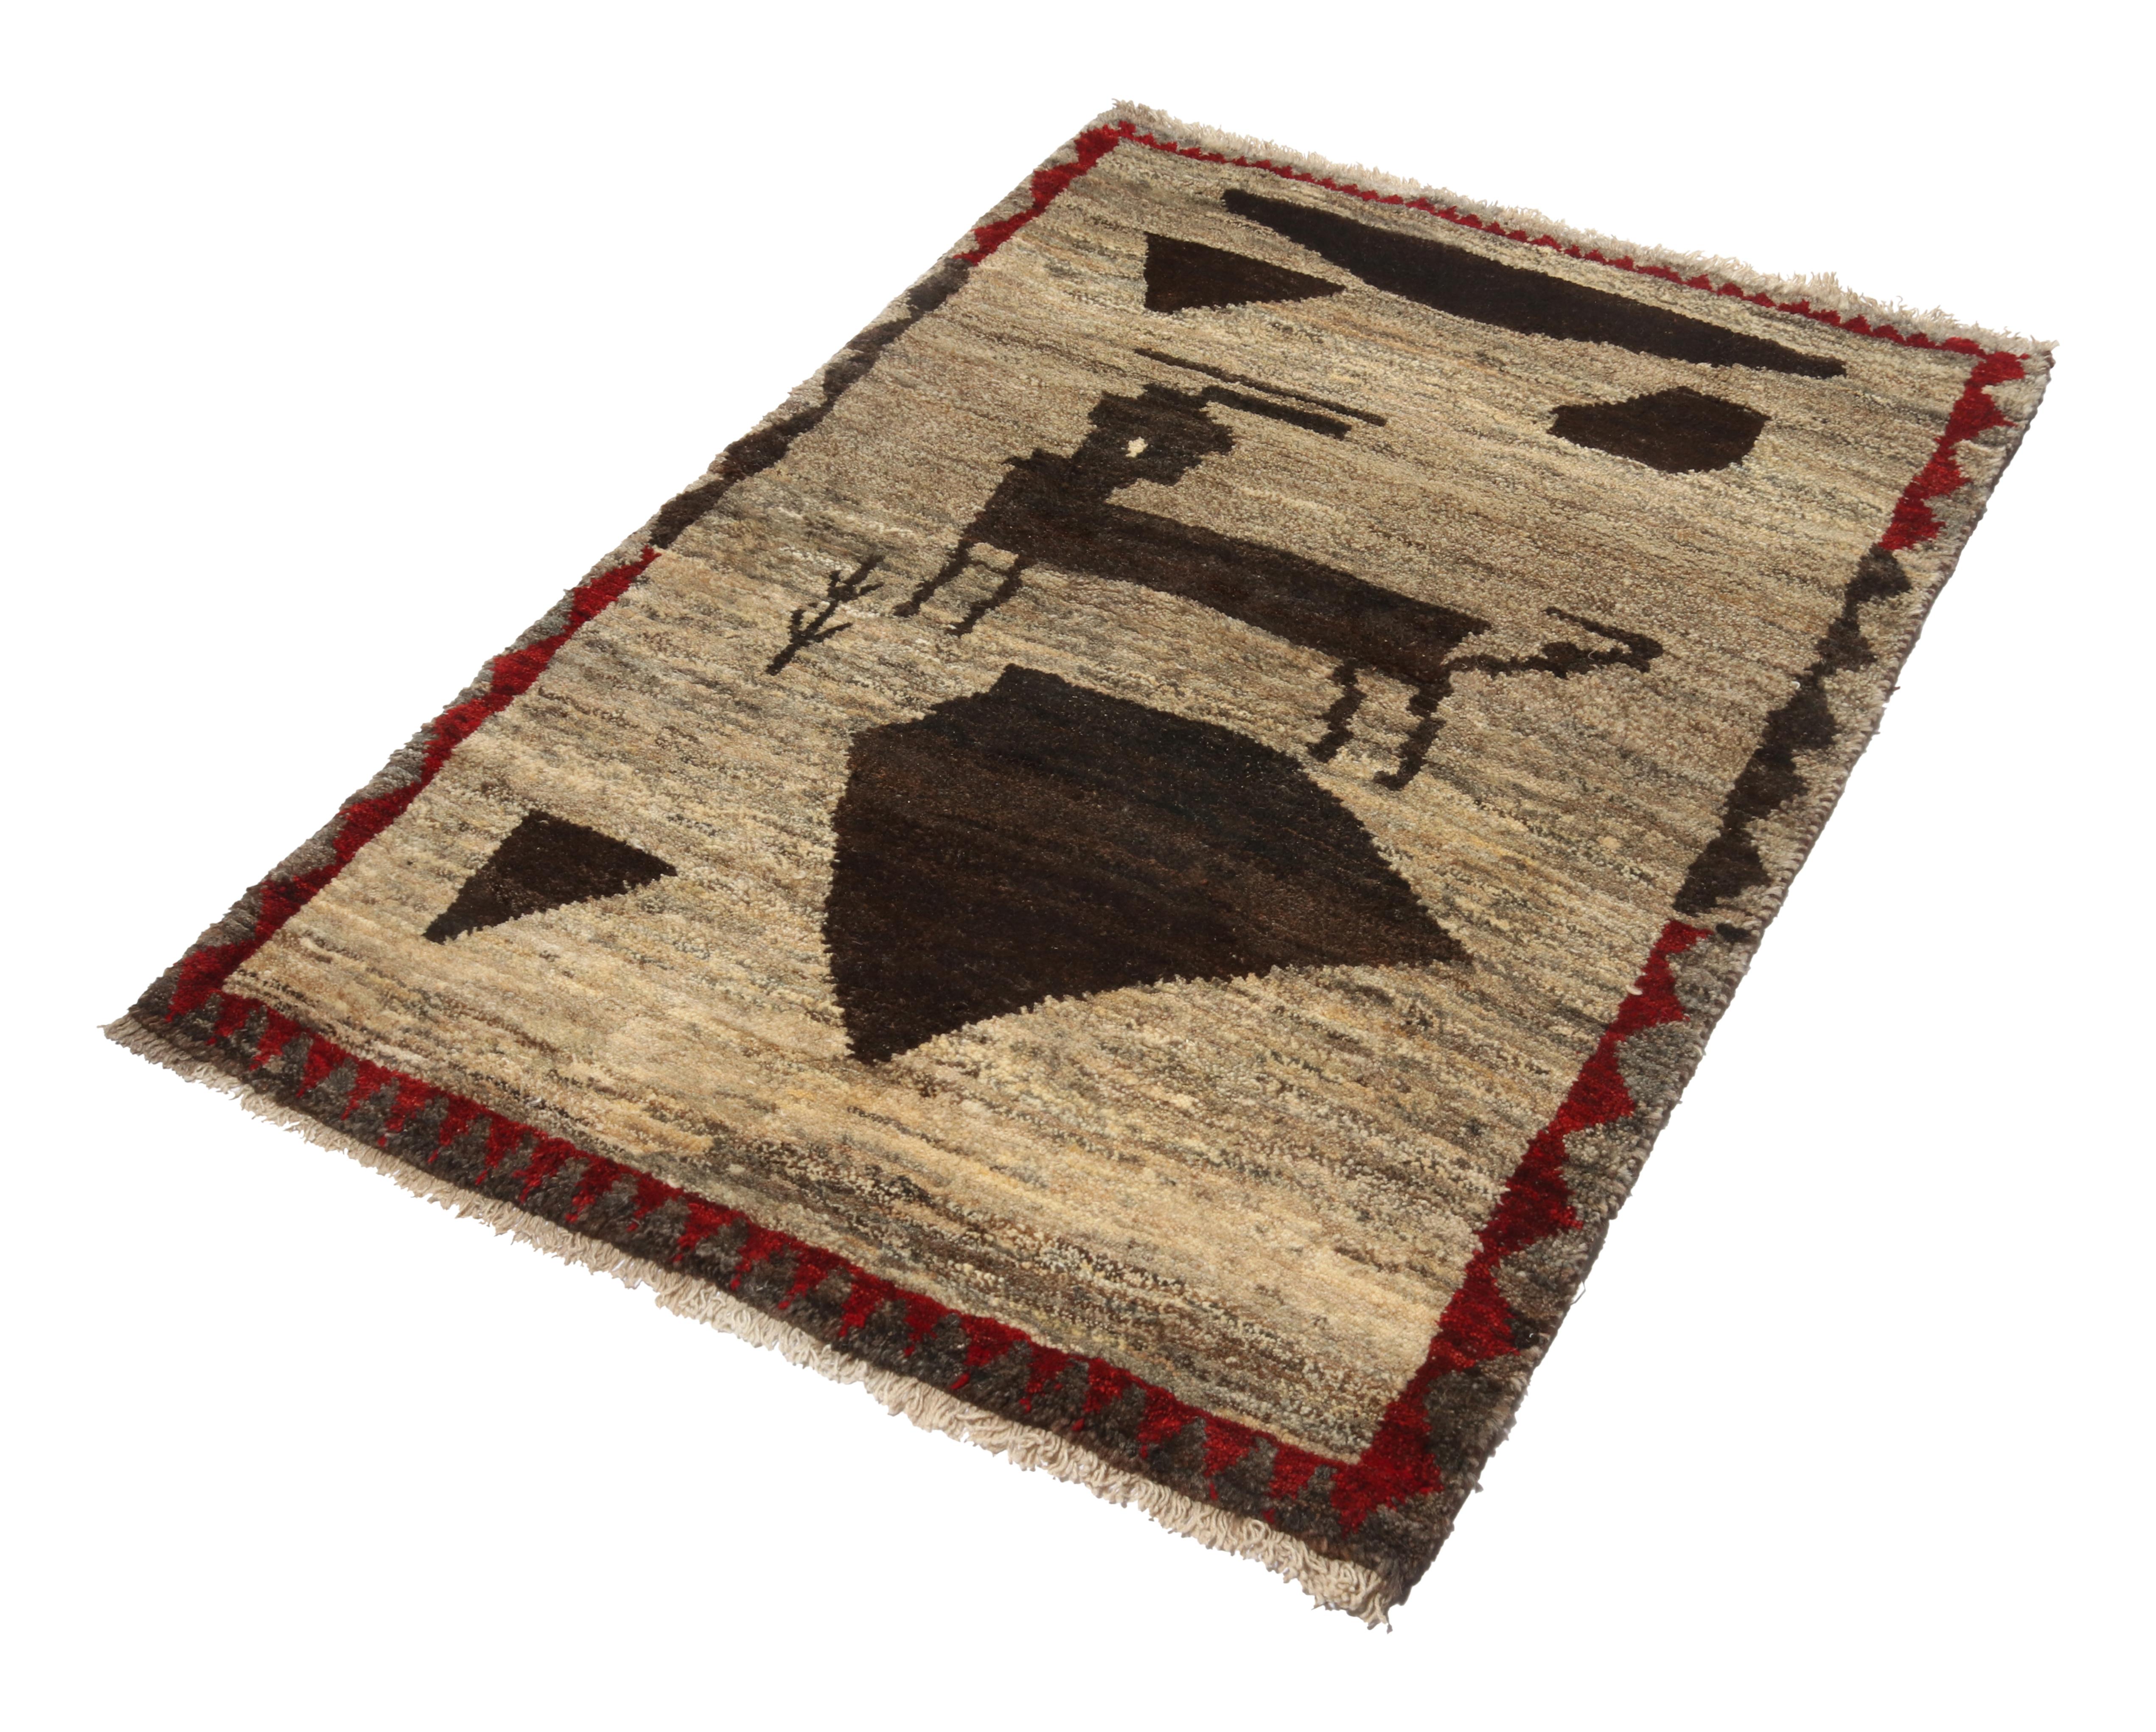 A vintage 3x5 Gabbeh rug, among the latest additions to Rug & Kilim’s newest curation of rare Persian tribal pieces. Hand-knotted in wool circa 1950-1960.

On the design:

This mid-century piece features a minimalist animal pictorial in rich